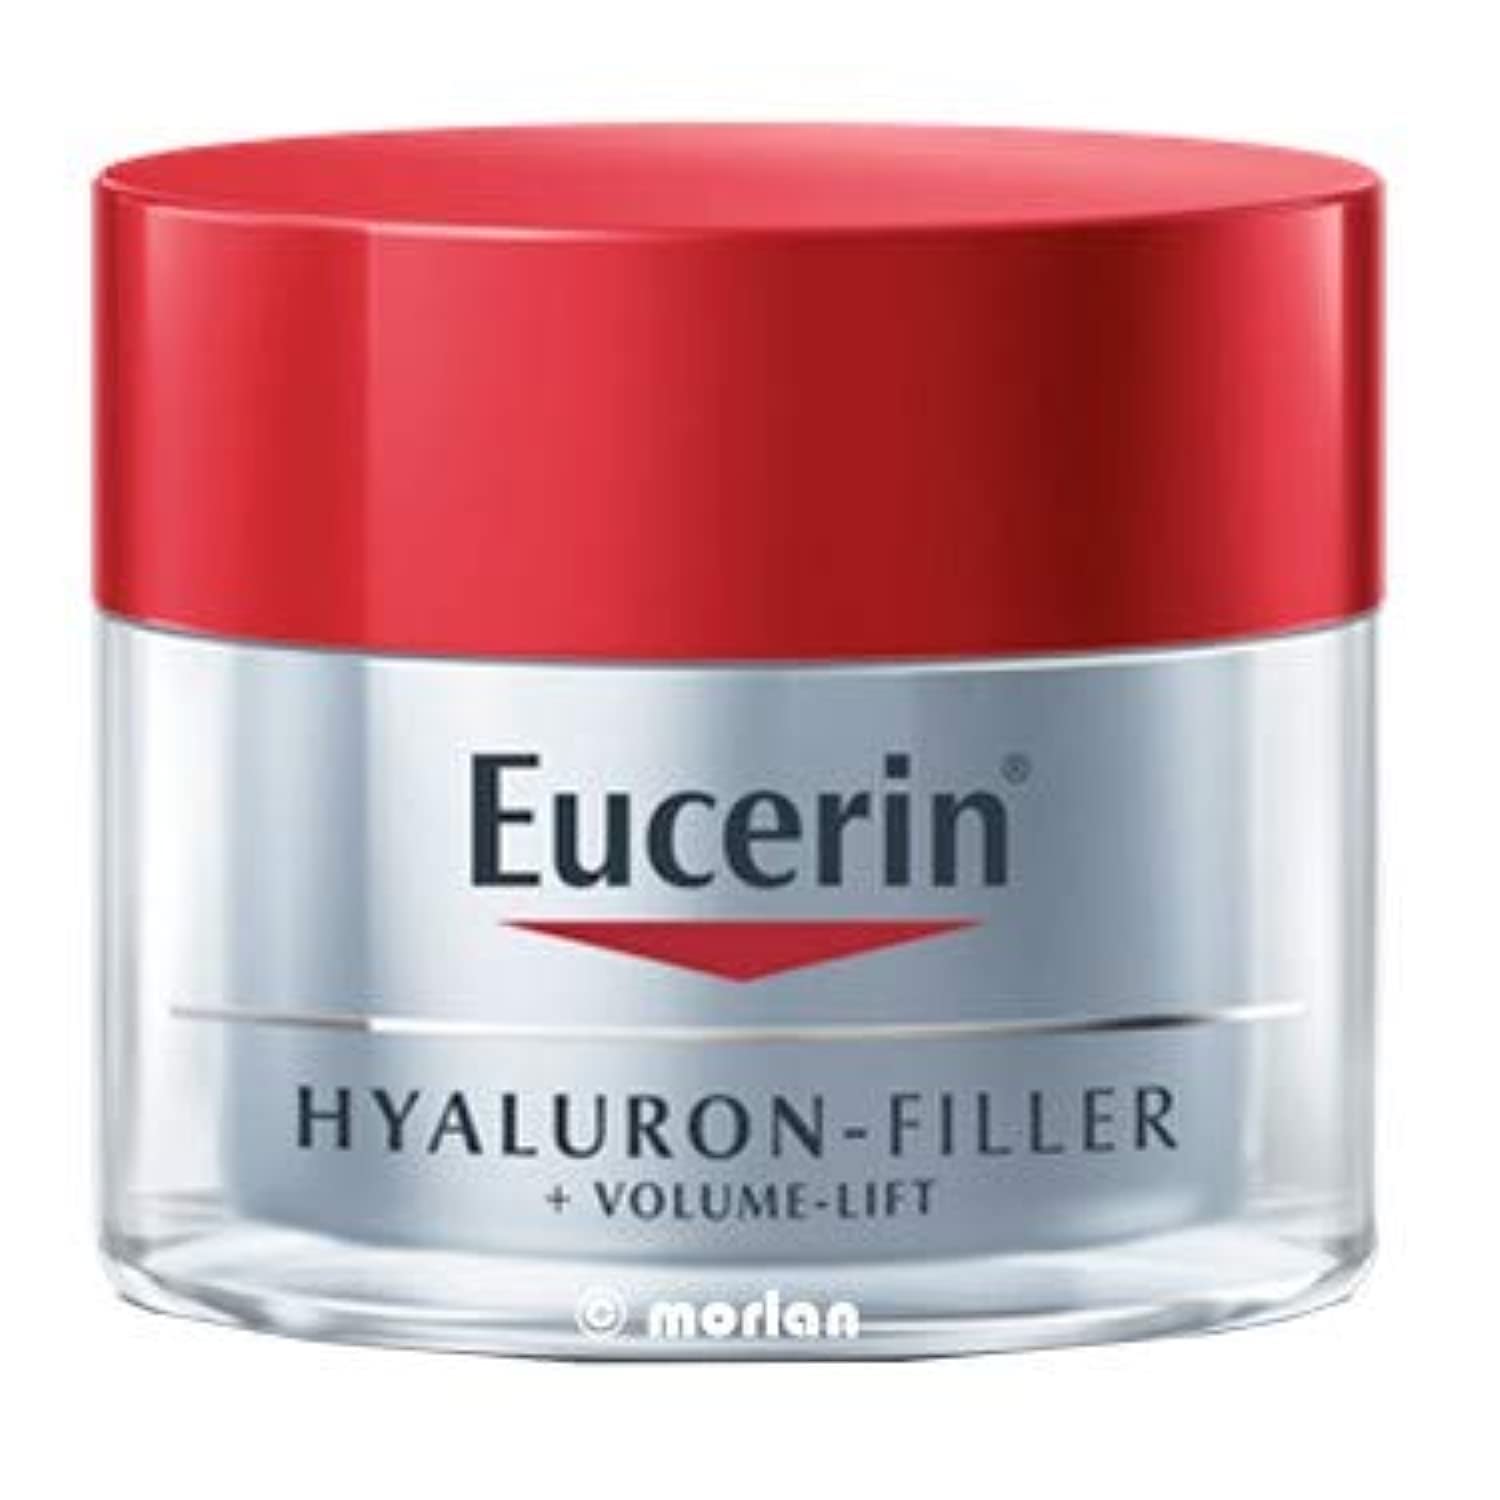 Eucerin Hyaluron-Filler Anti-Aging Night Cream 50 for Face with Hyaluronic Acid